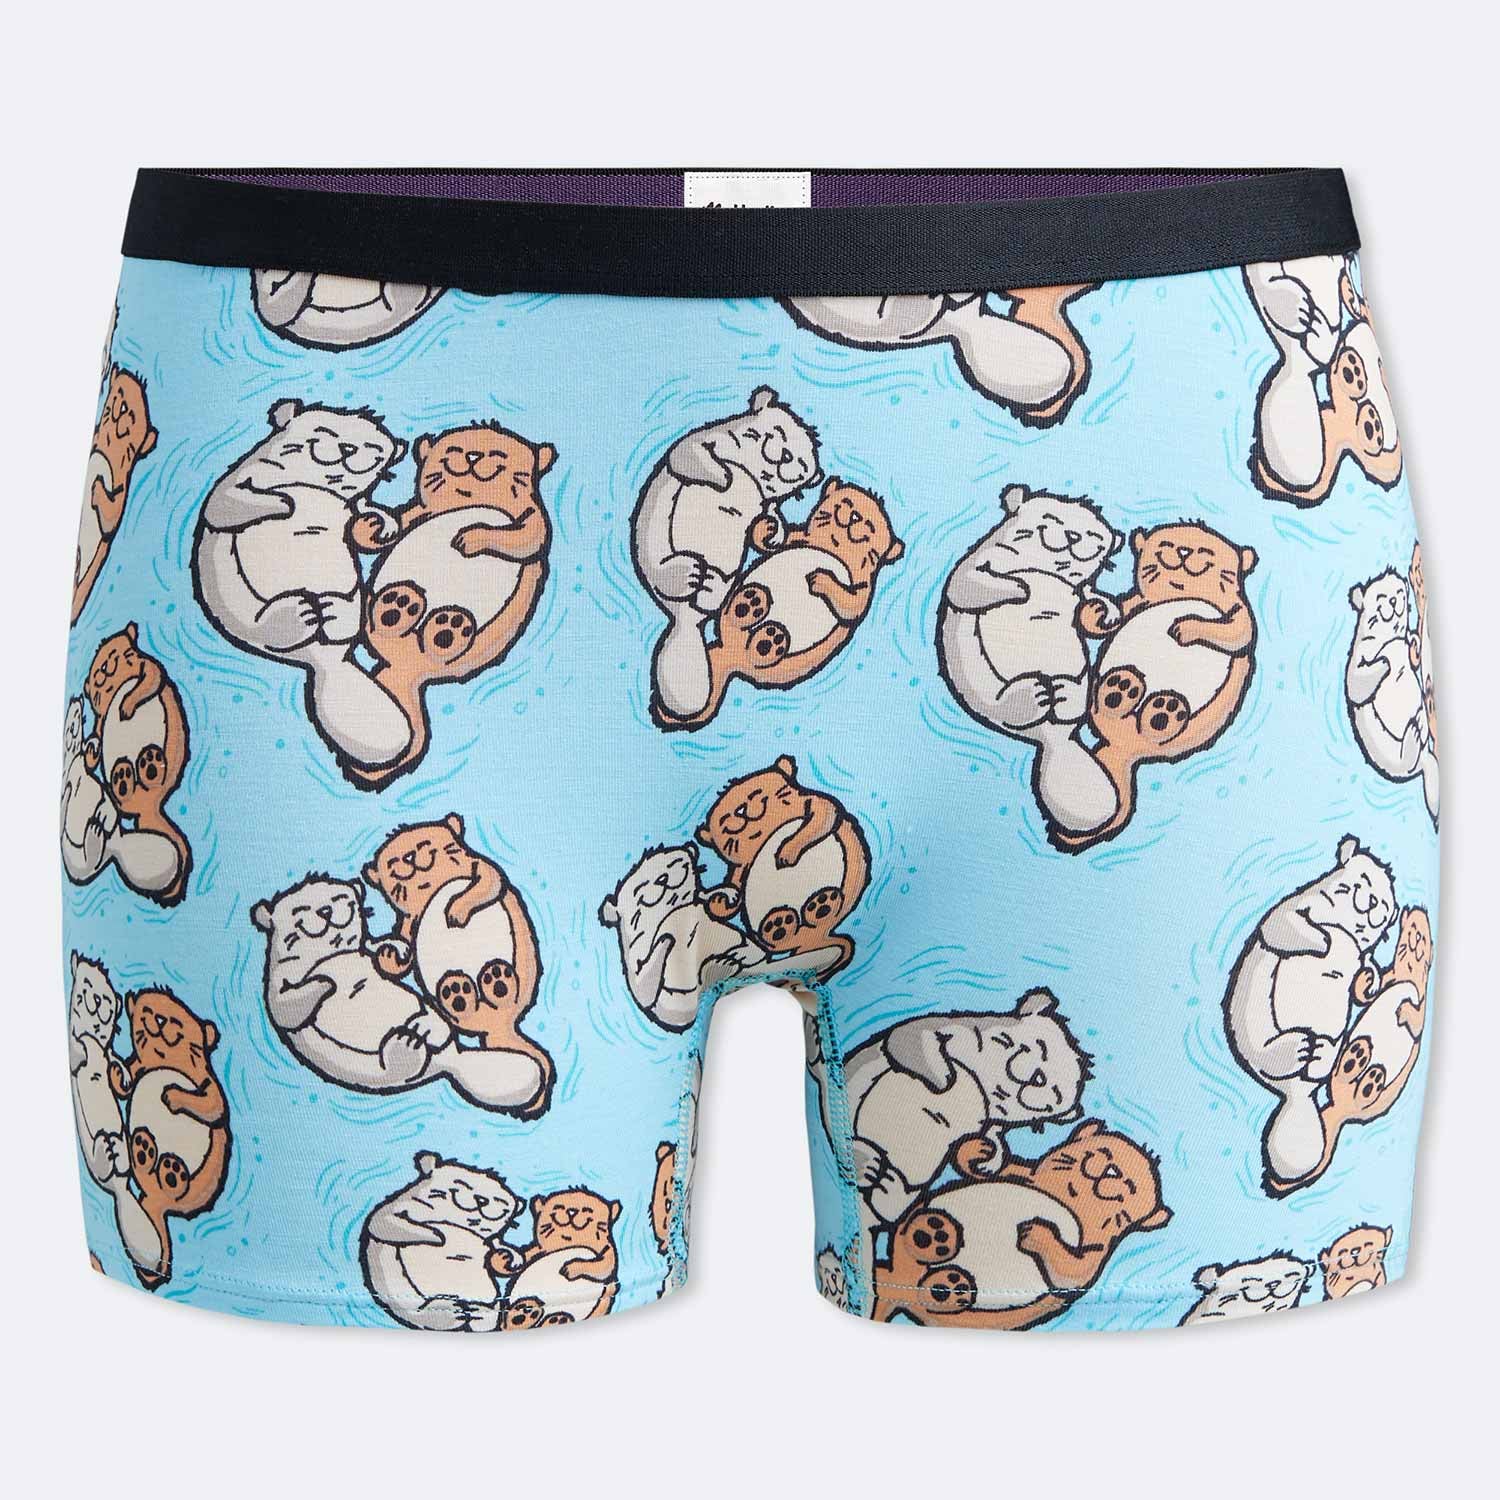 Women's Bikini, MeUndies Sells Matching Underwear For You and Your  Significant Otter, and We Need These